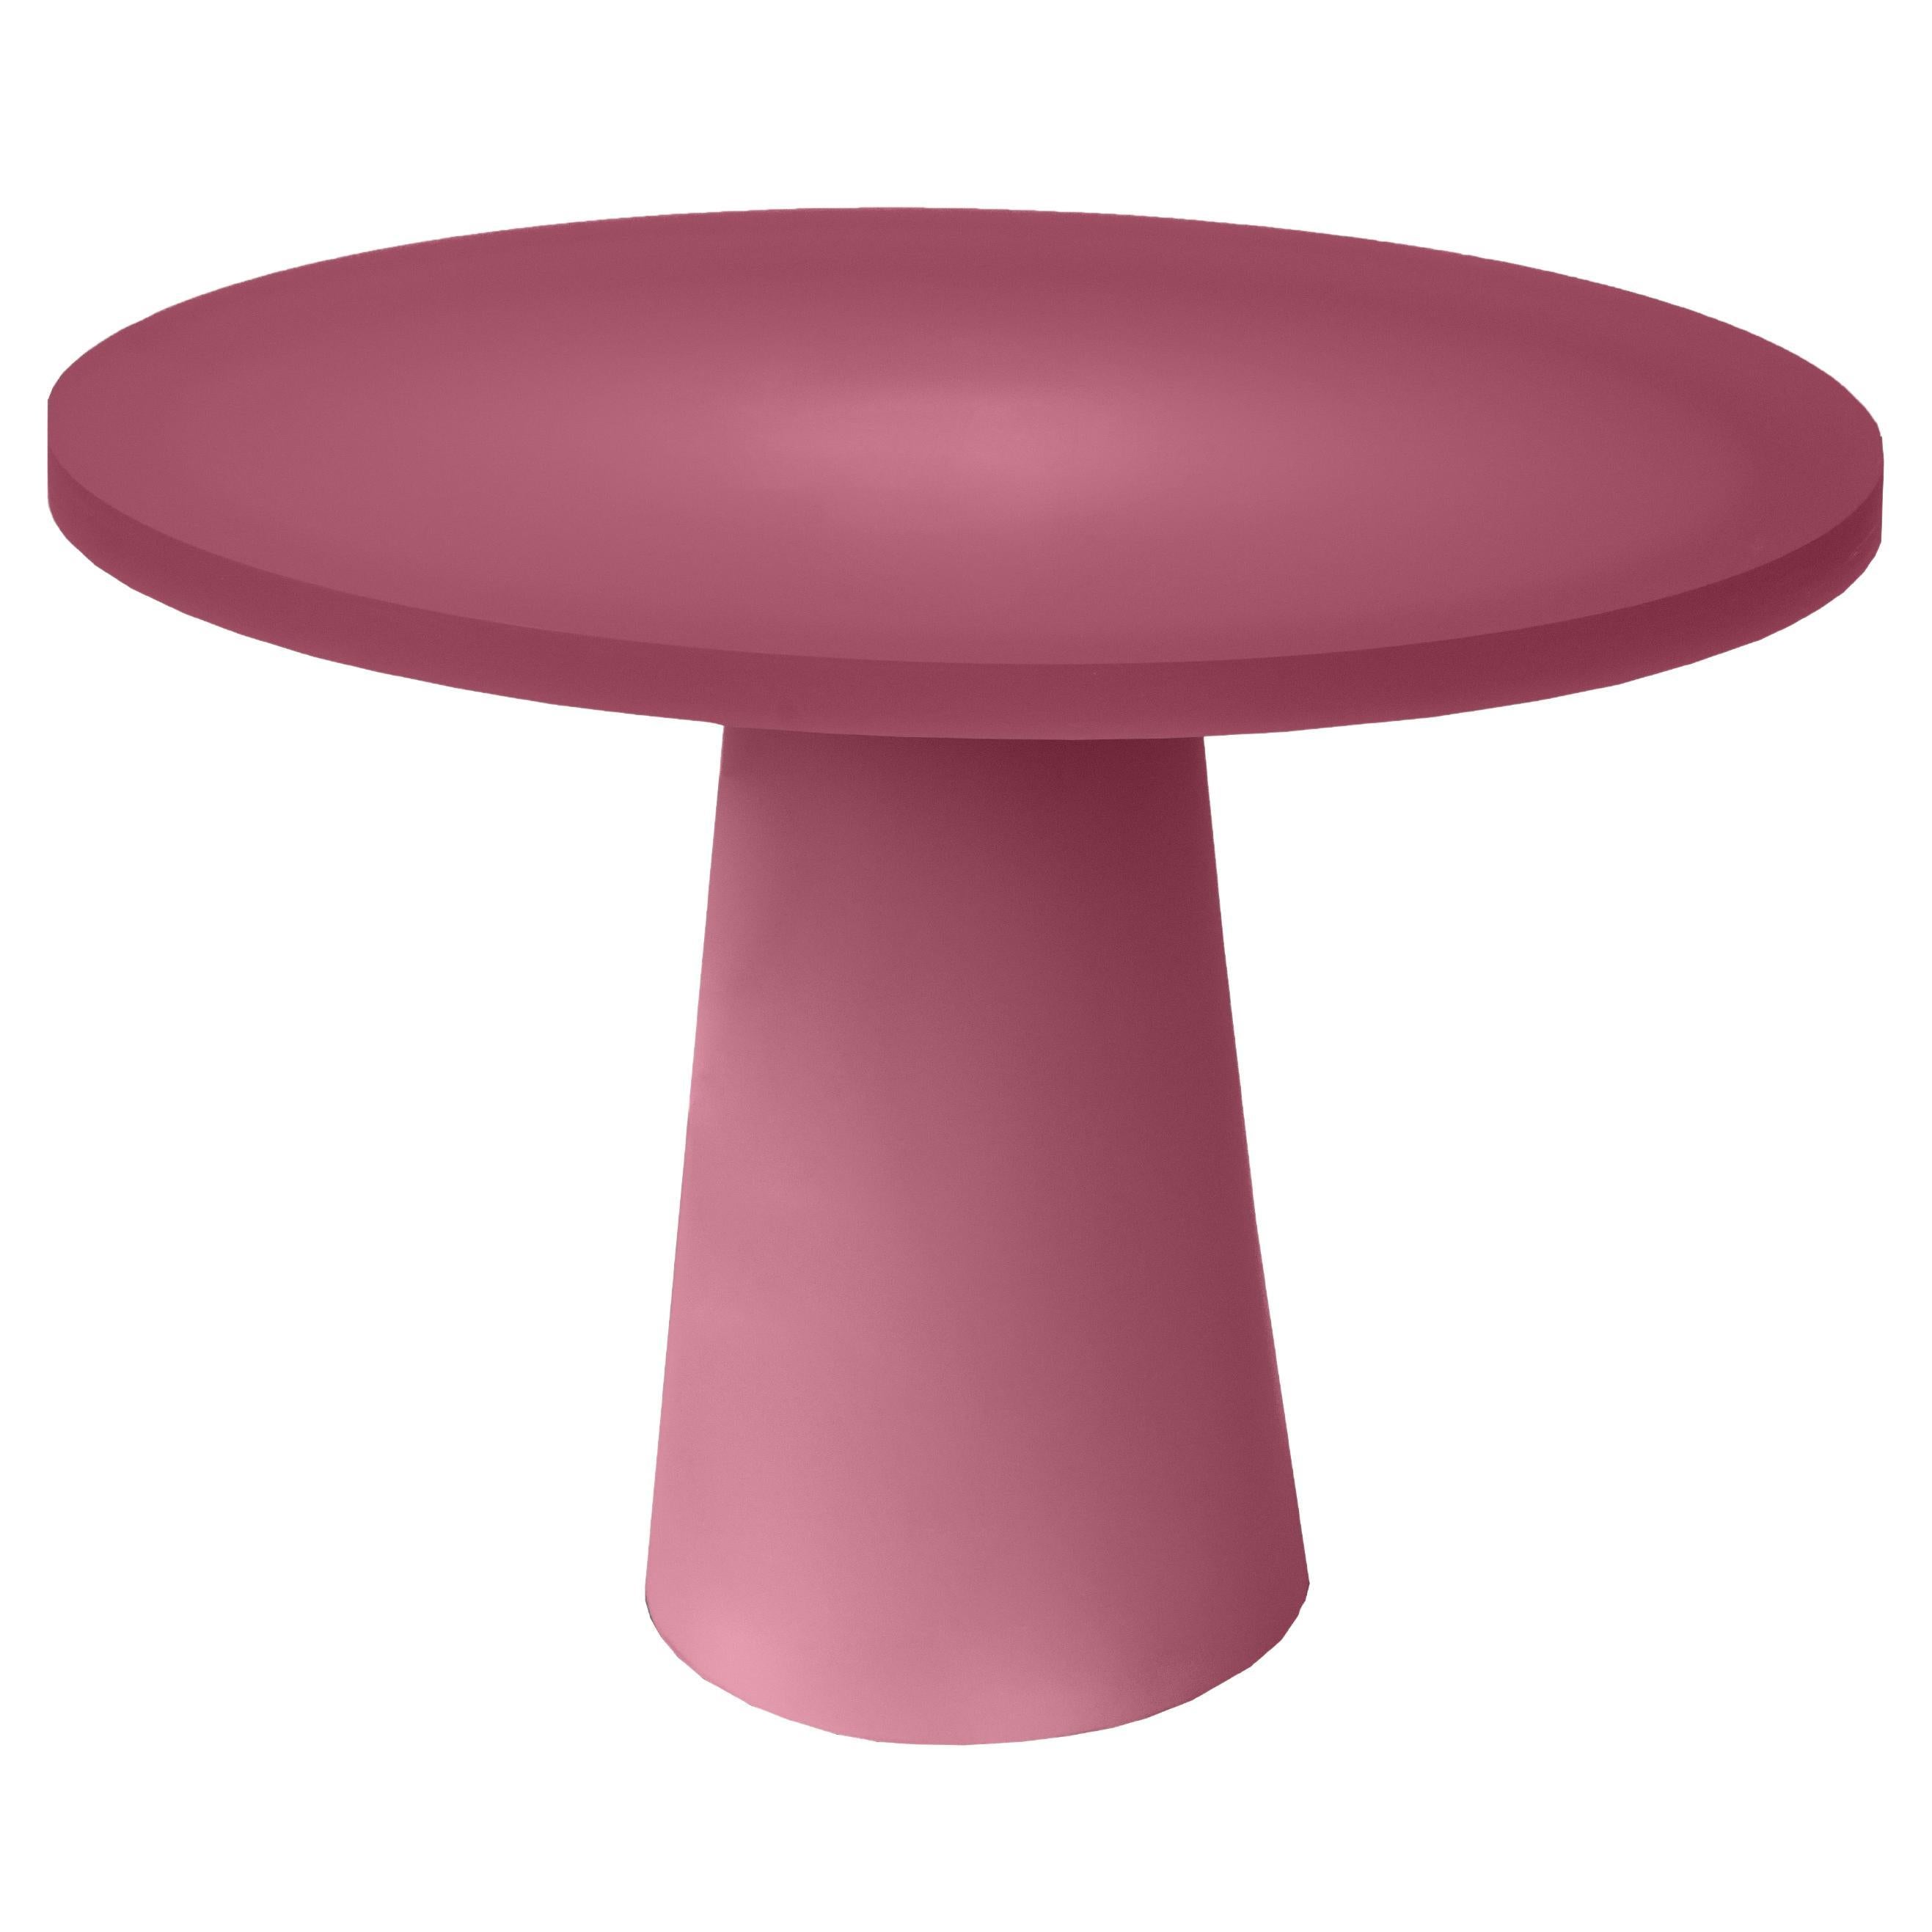 Elliptical Entry Resin Table In Dusty Pink by Facture, REP by Tuleste Factory